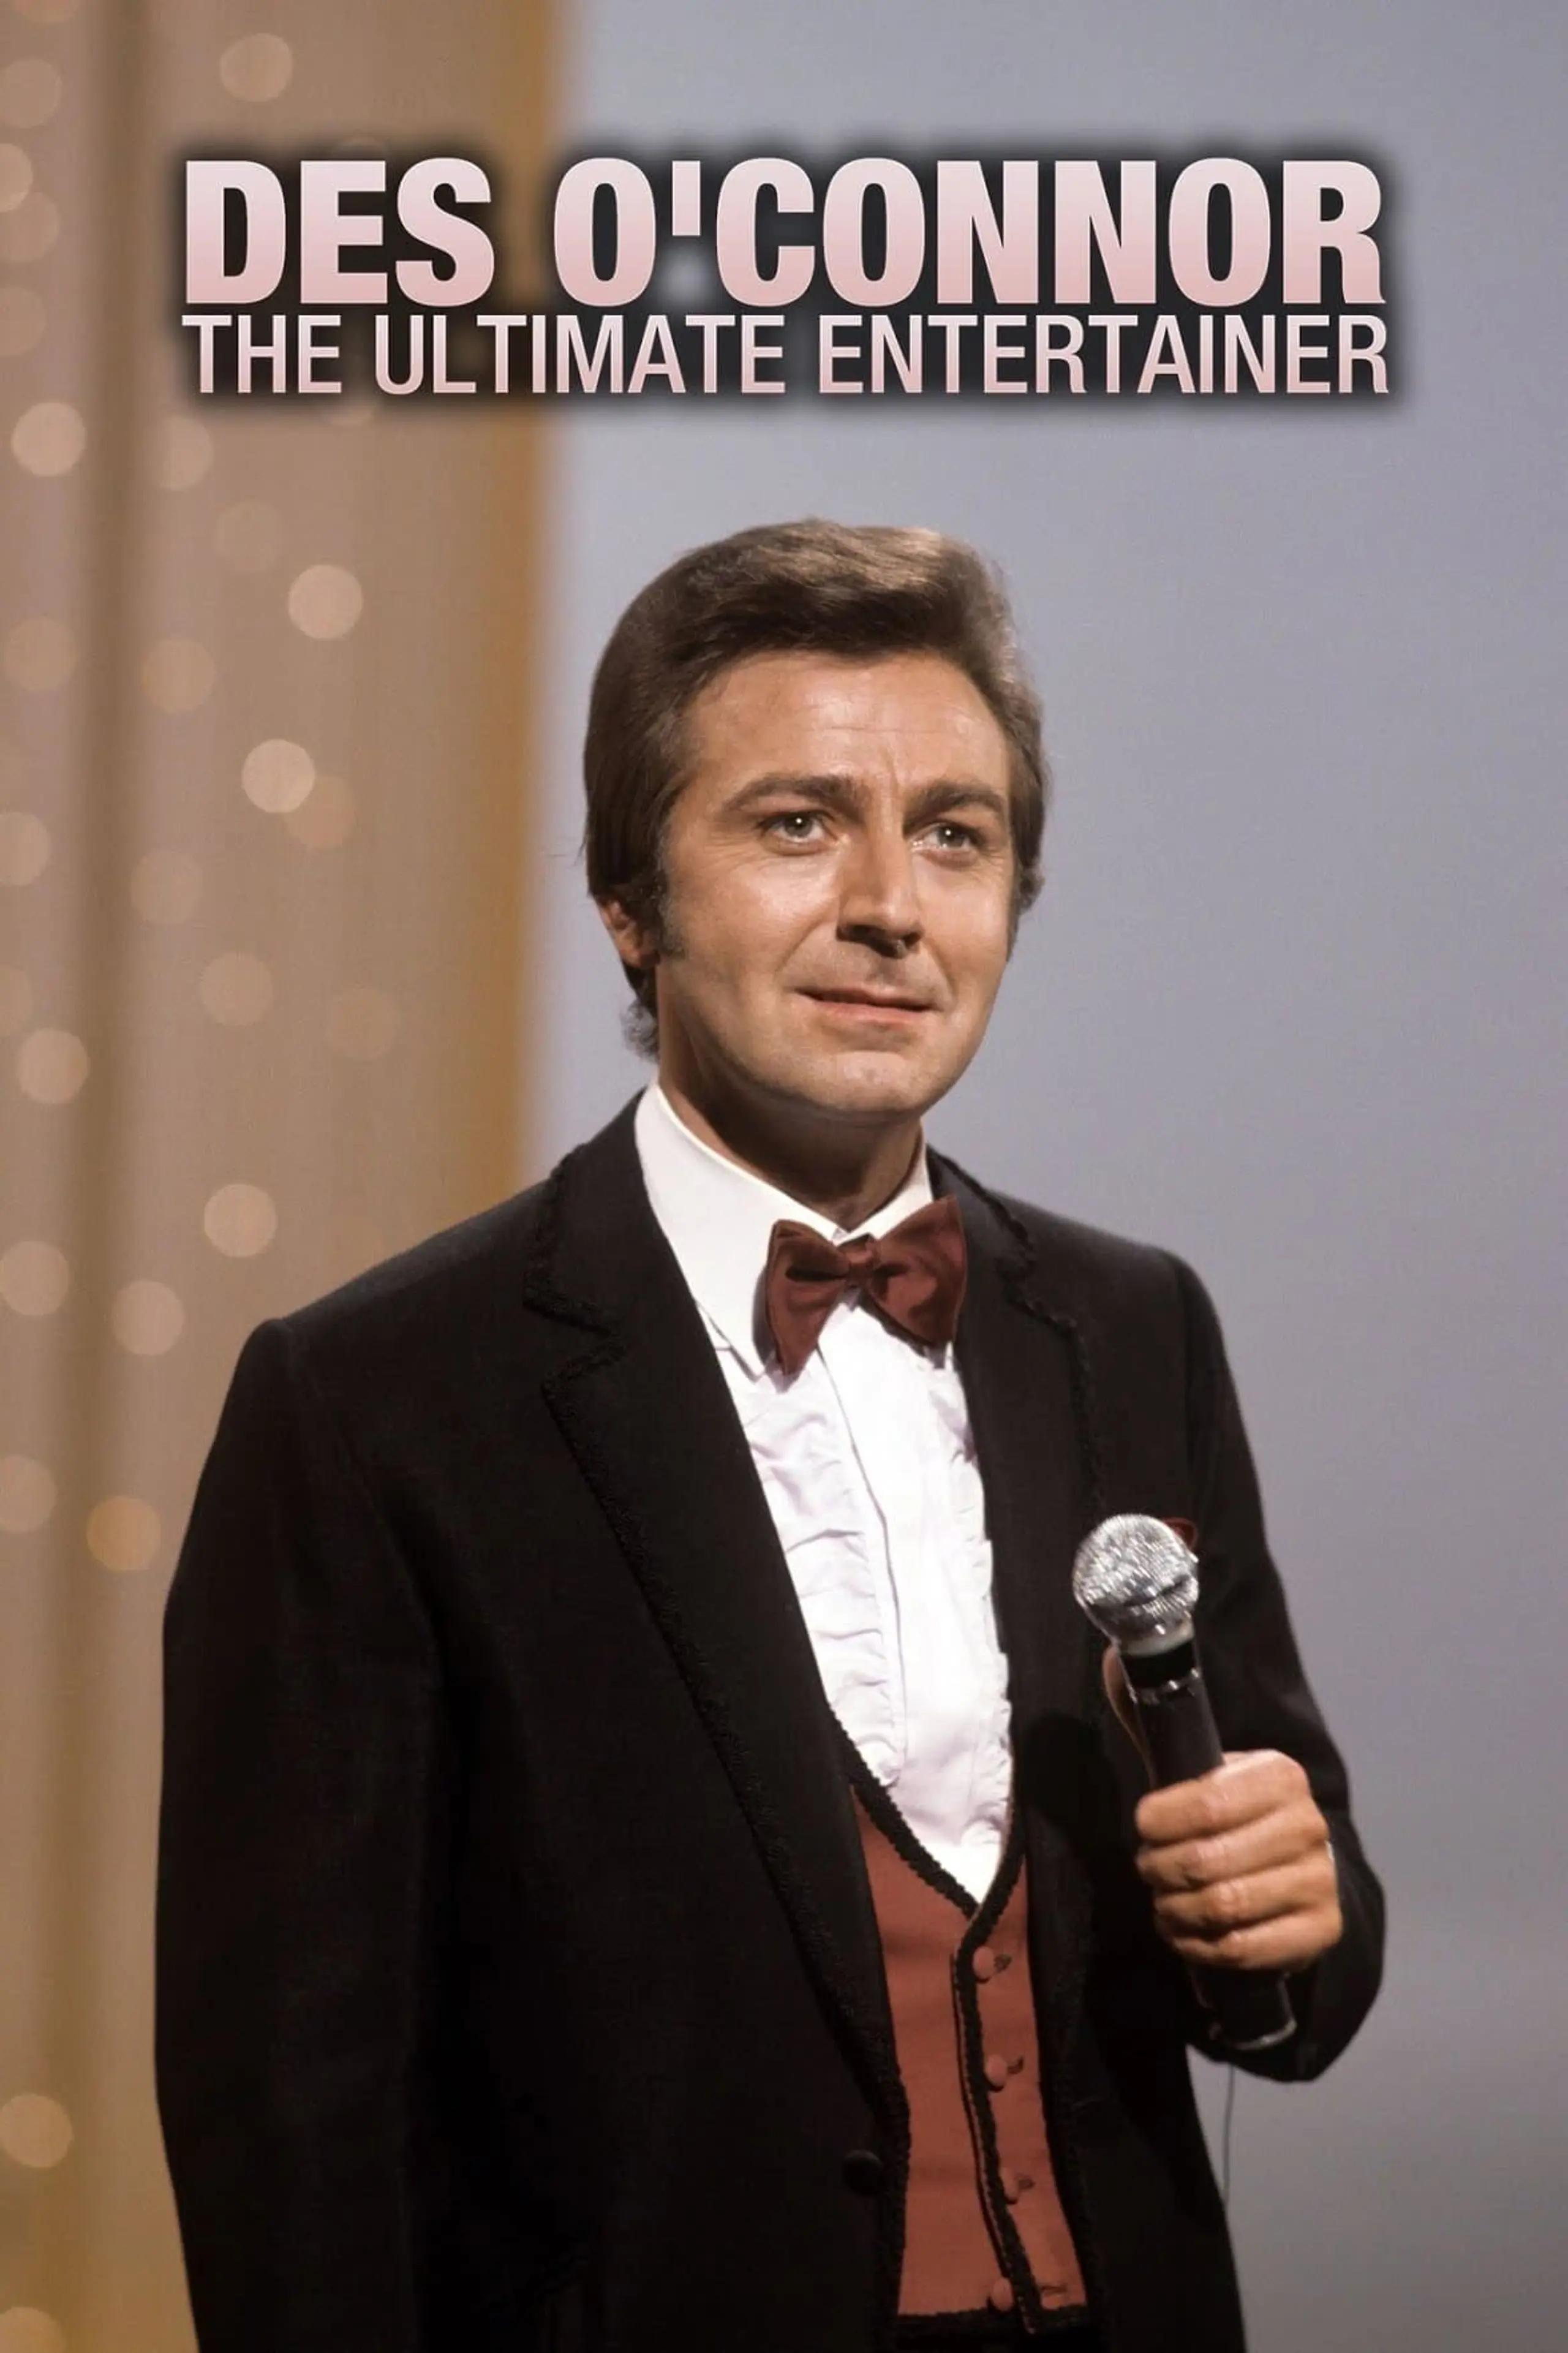 Des O'Connor: The Ultimate Entertainer